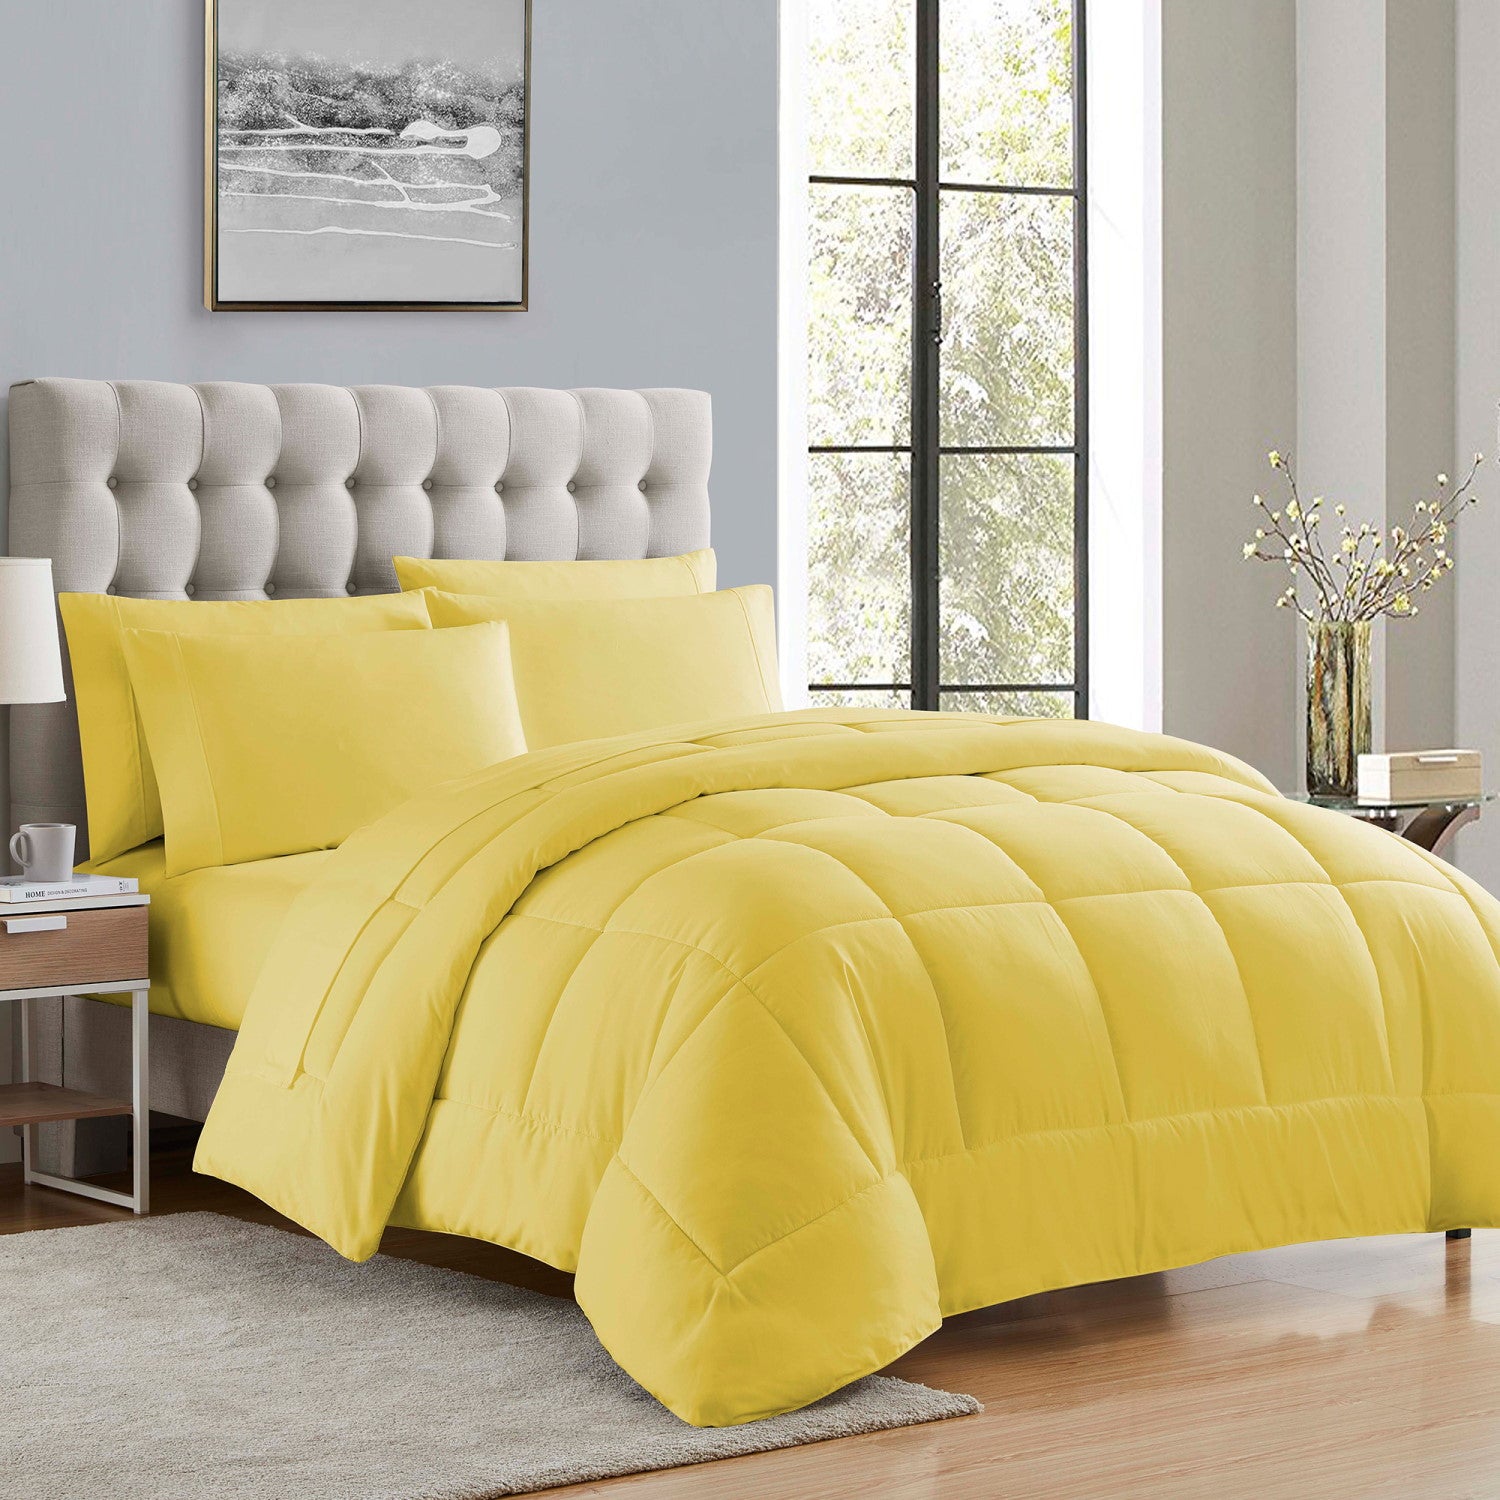 Basic 5-Piece Bed in a Bag Set Yellow - Folded